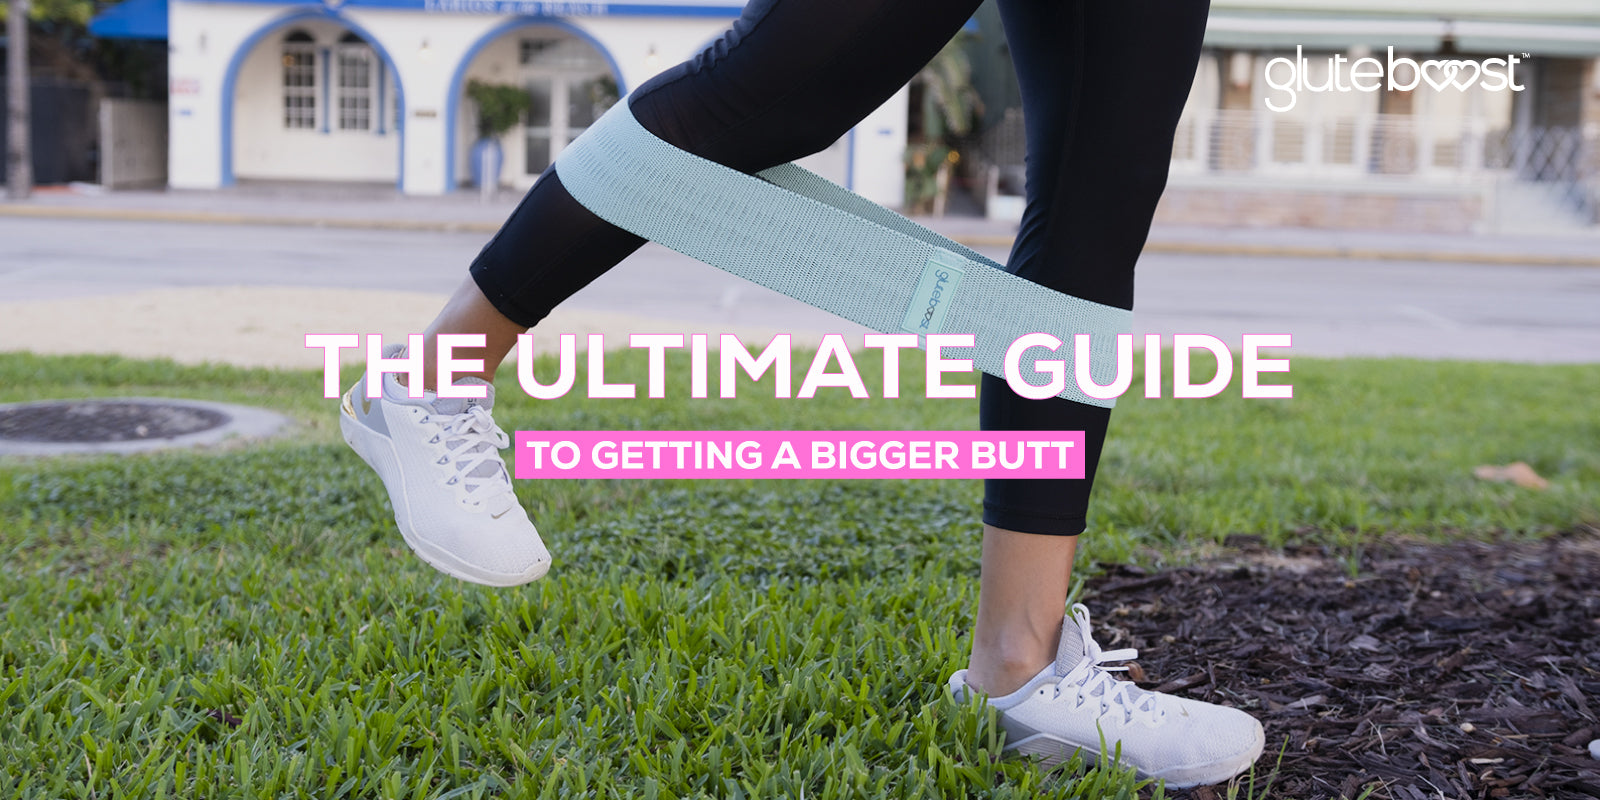 The Ultimate Guide to Getting a Bigger Butt